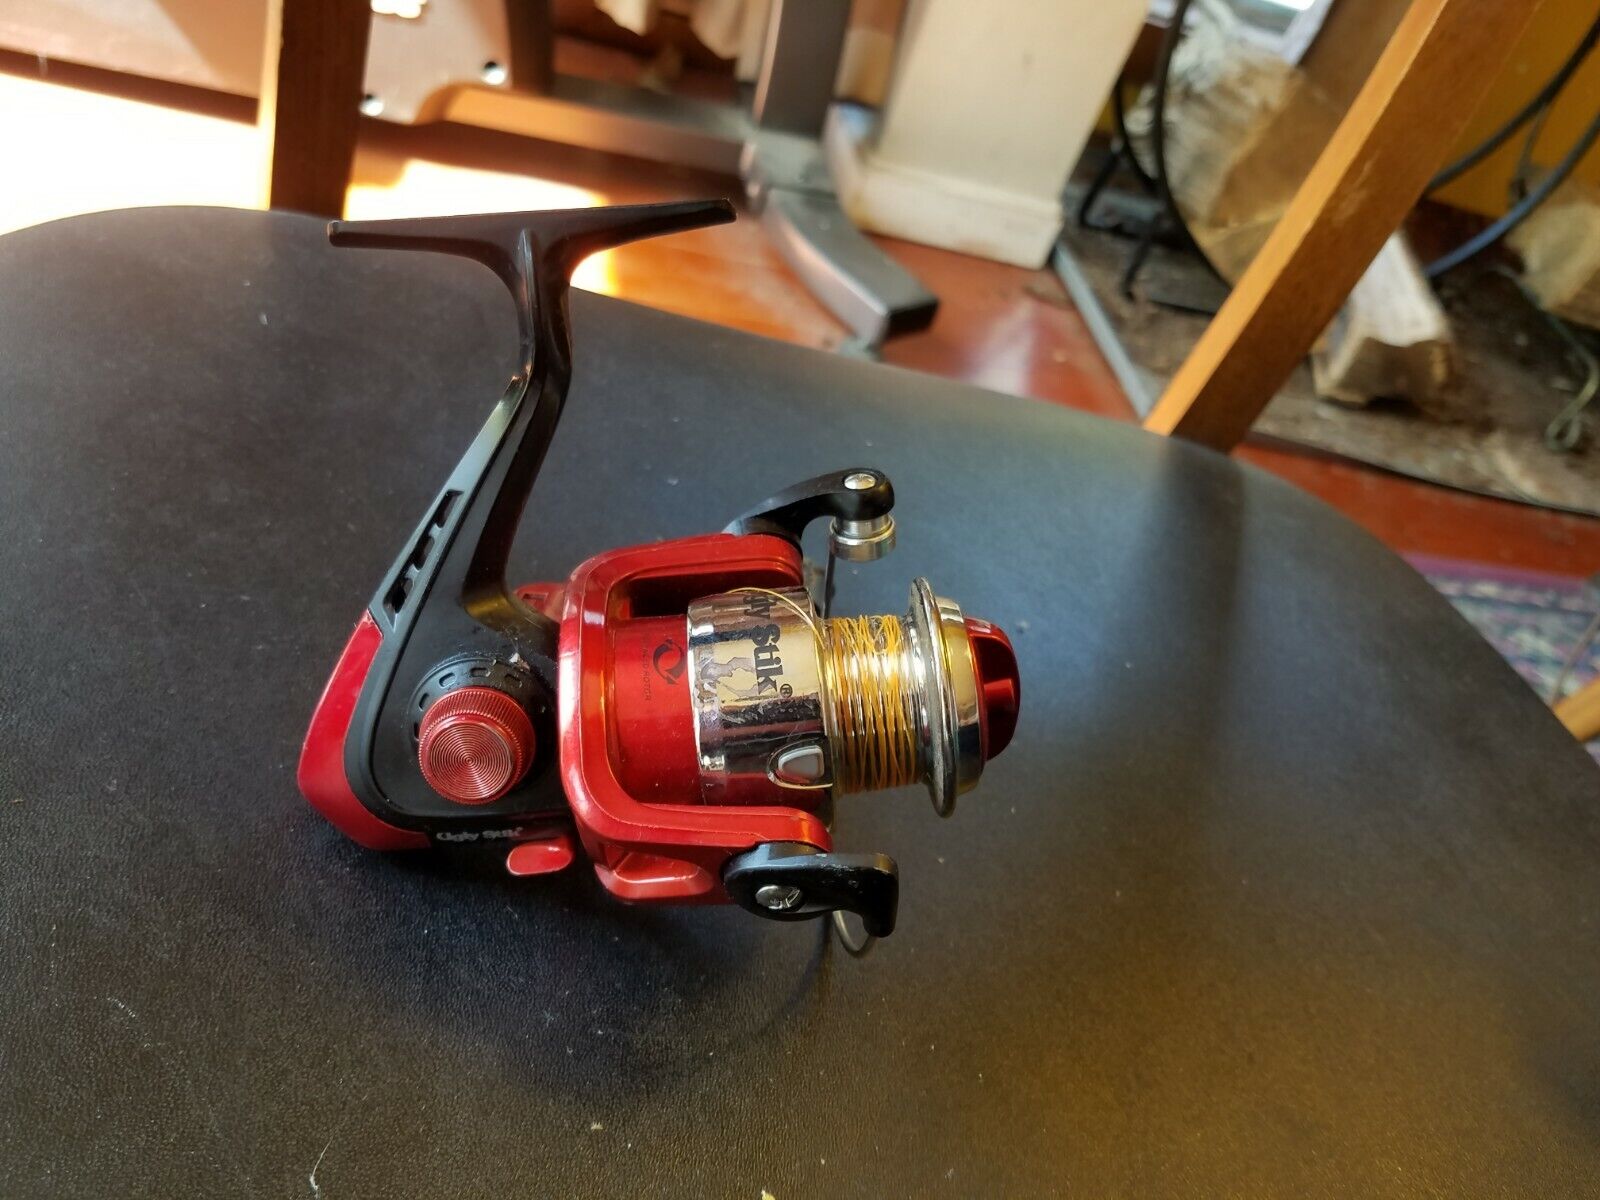 Red UGLY STIK Spincast Fishing Reel 5.5:1 Gear Ration 4/190 Line Capacity